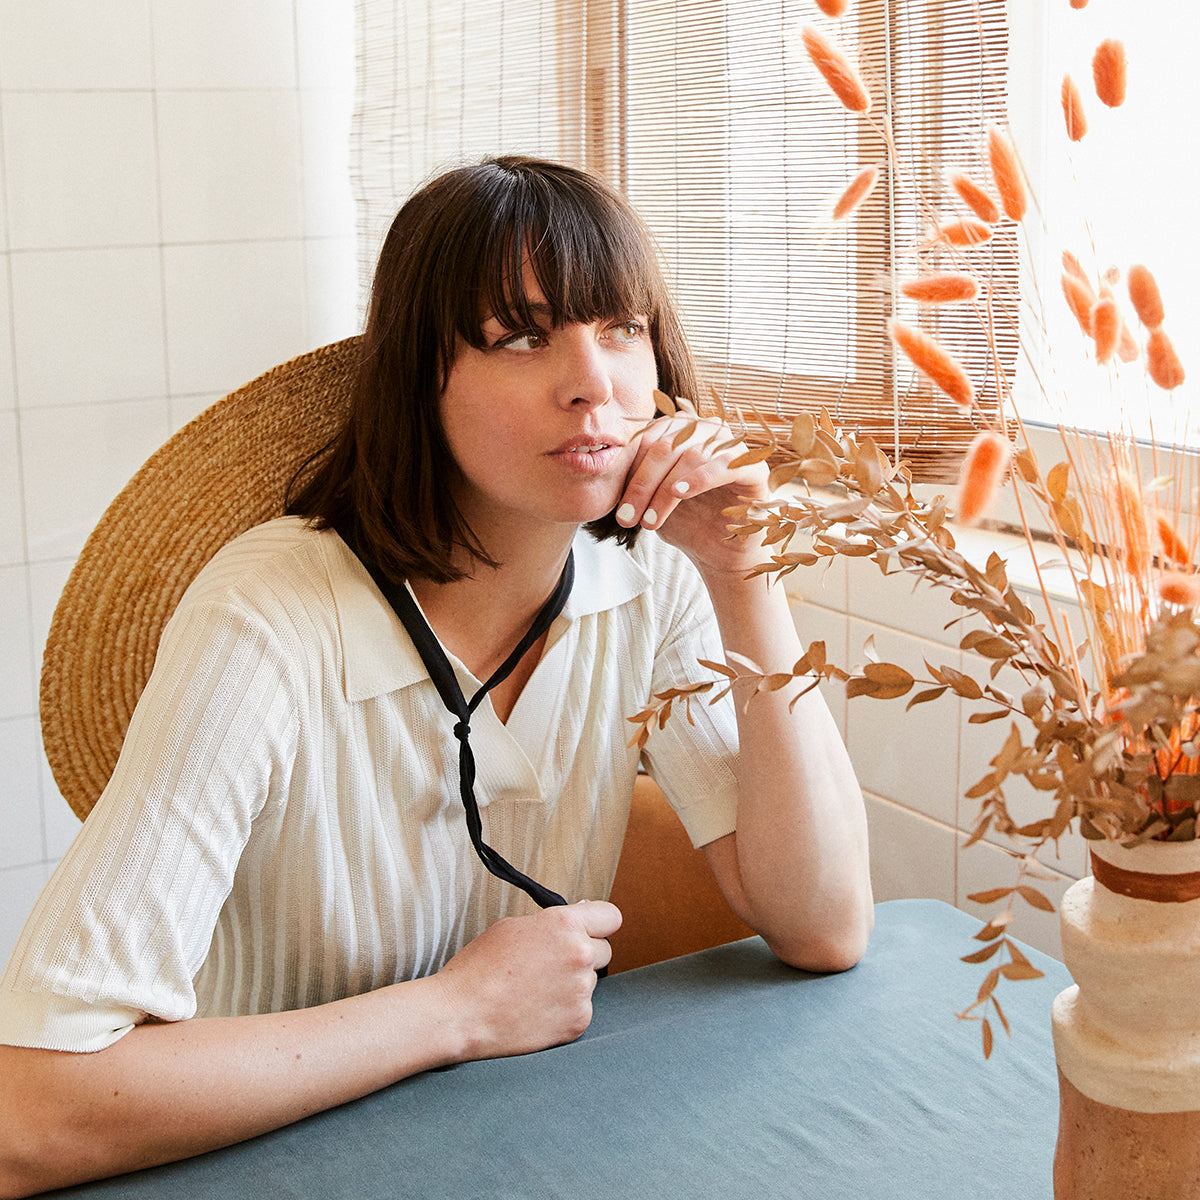 A down-to-earth chat with Emmanuelle Roule,  Marseille-based designer and ceramic artist